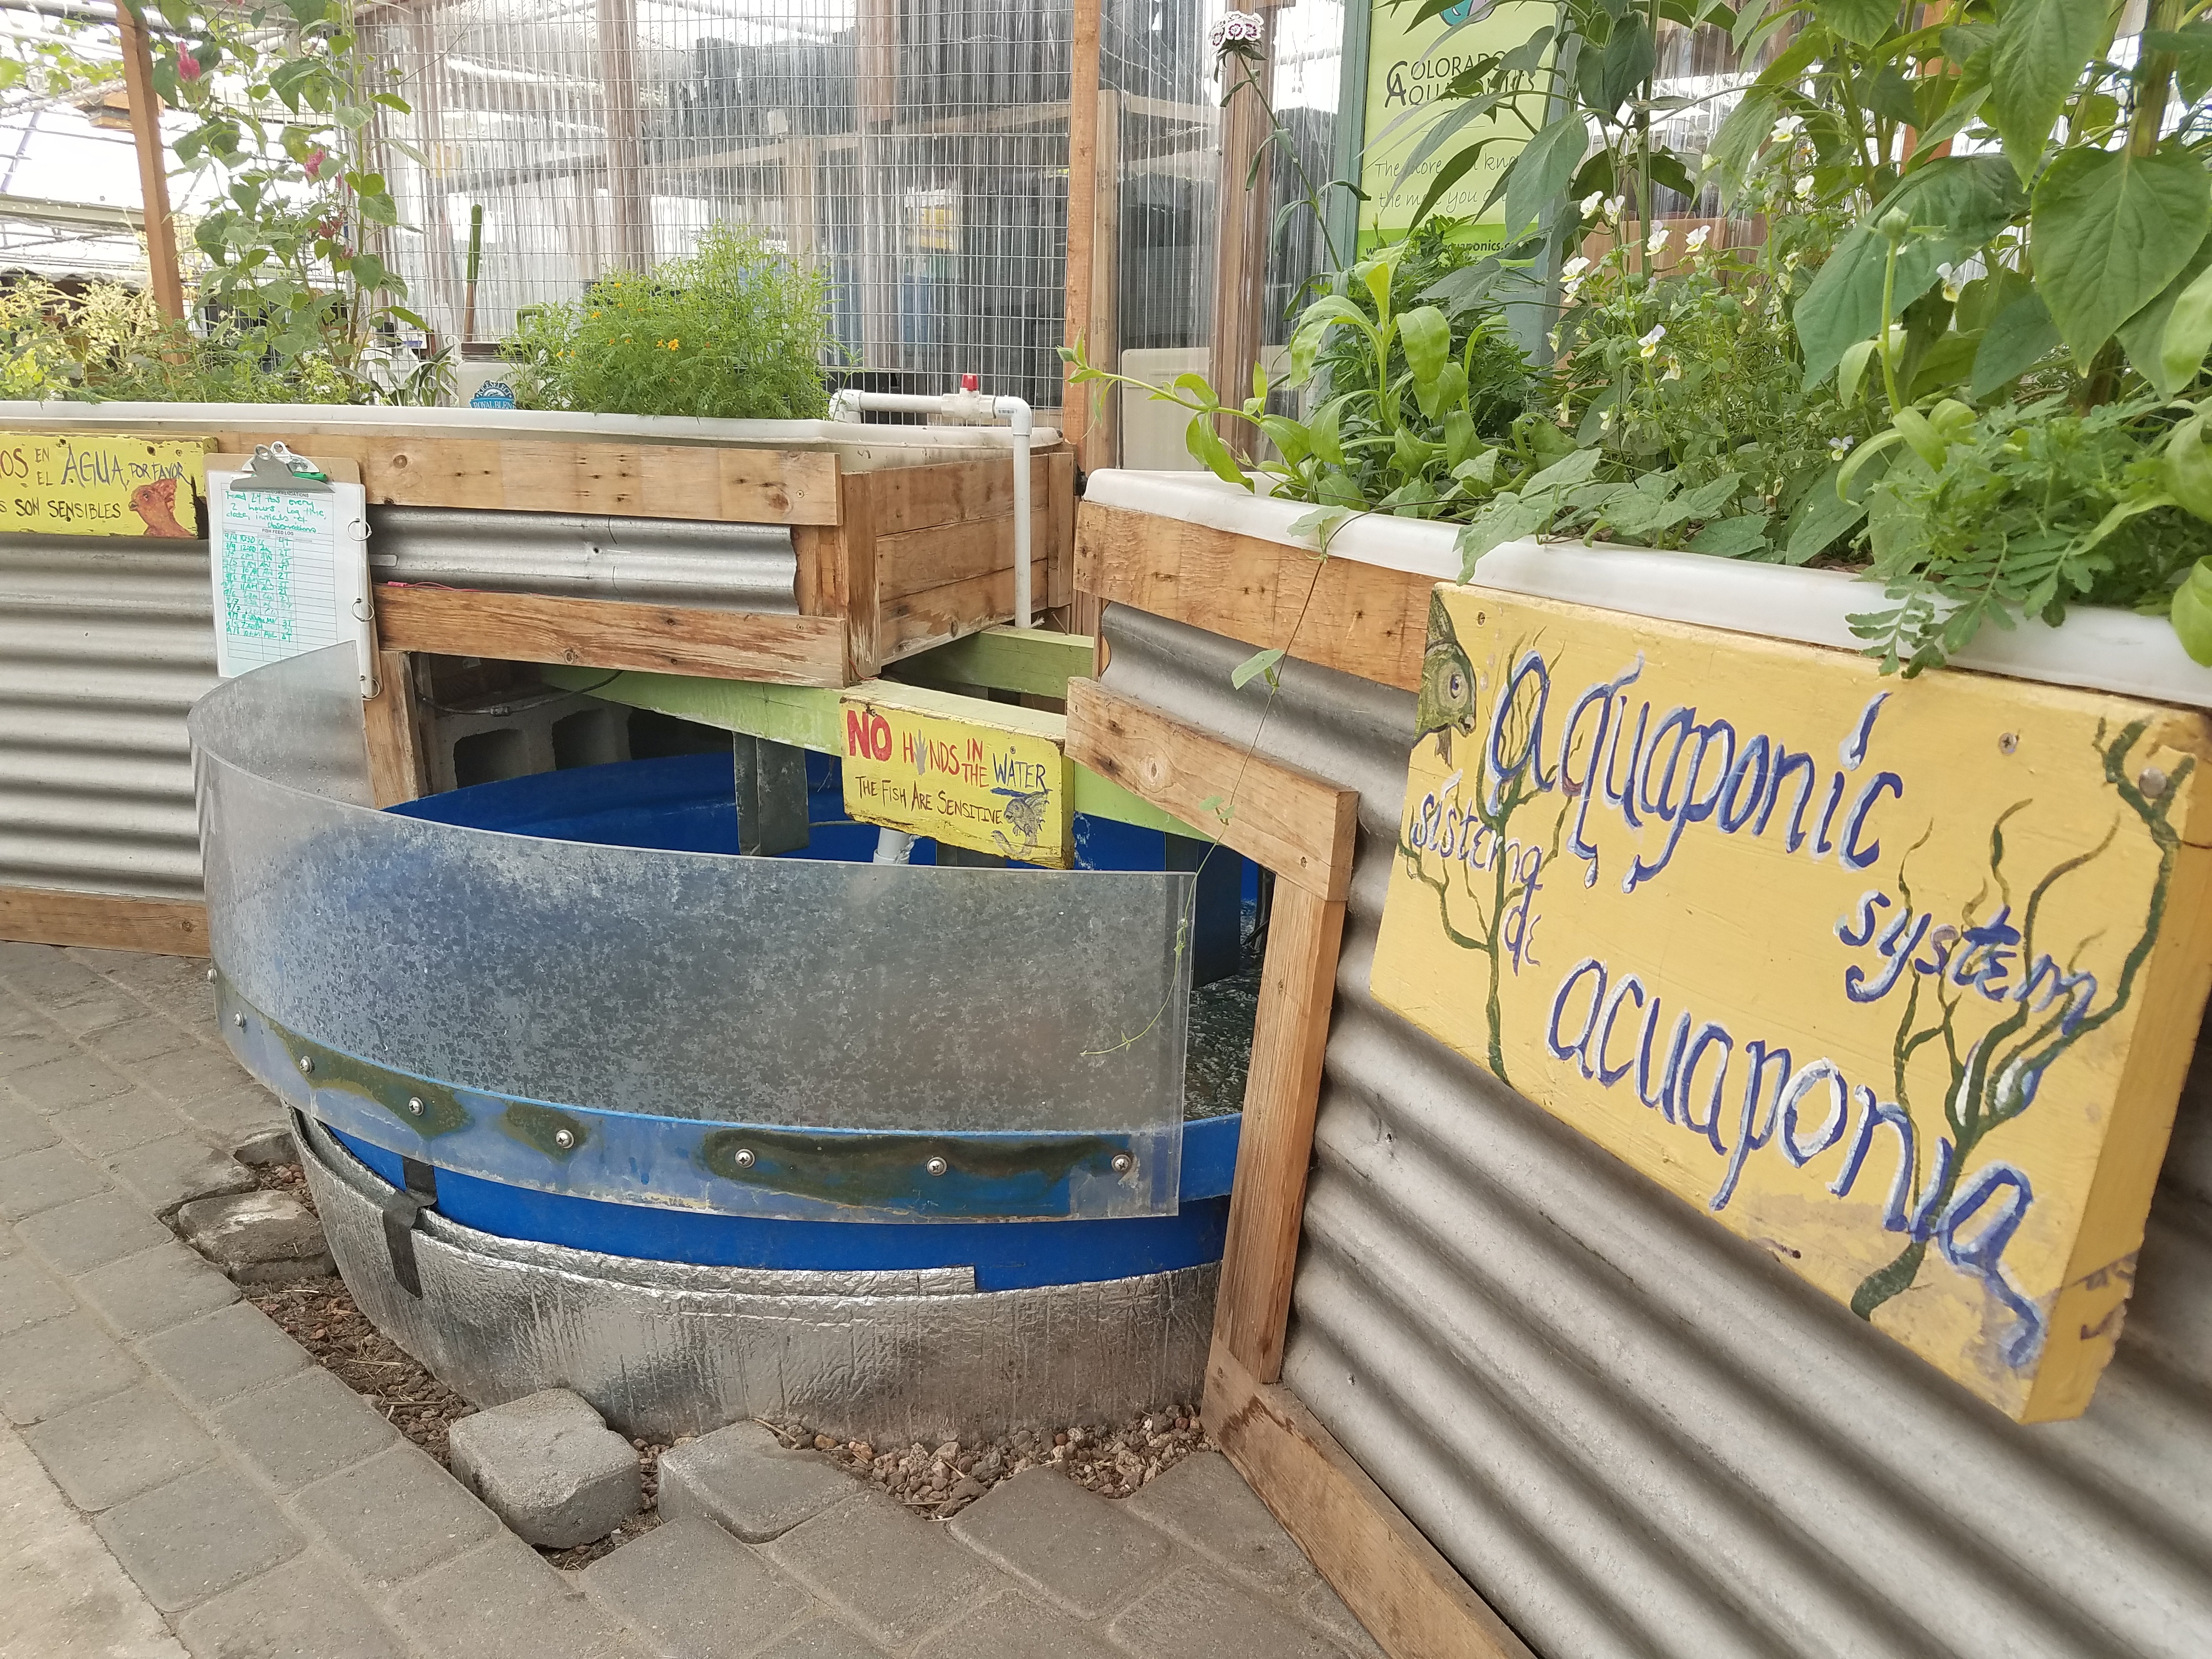 Aquaponic system for growing fish and plants at the GrowHaus, a nonprofit indoor farm in Denver's Elyria-Swansea neighborhood.